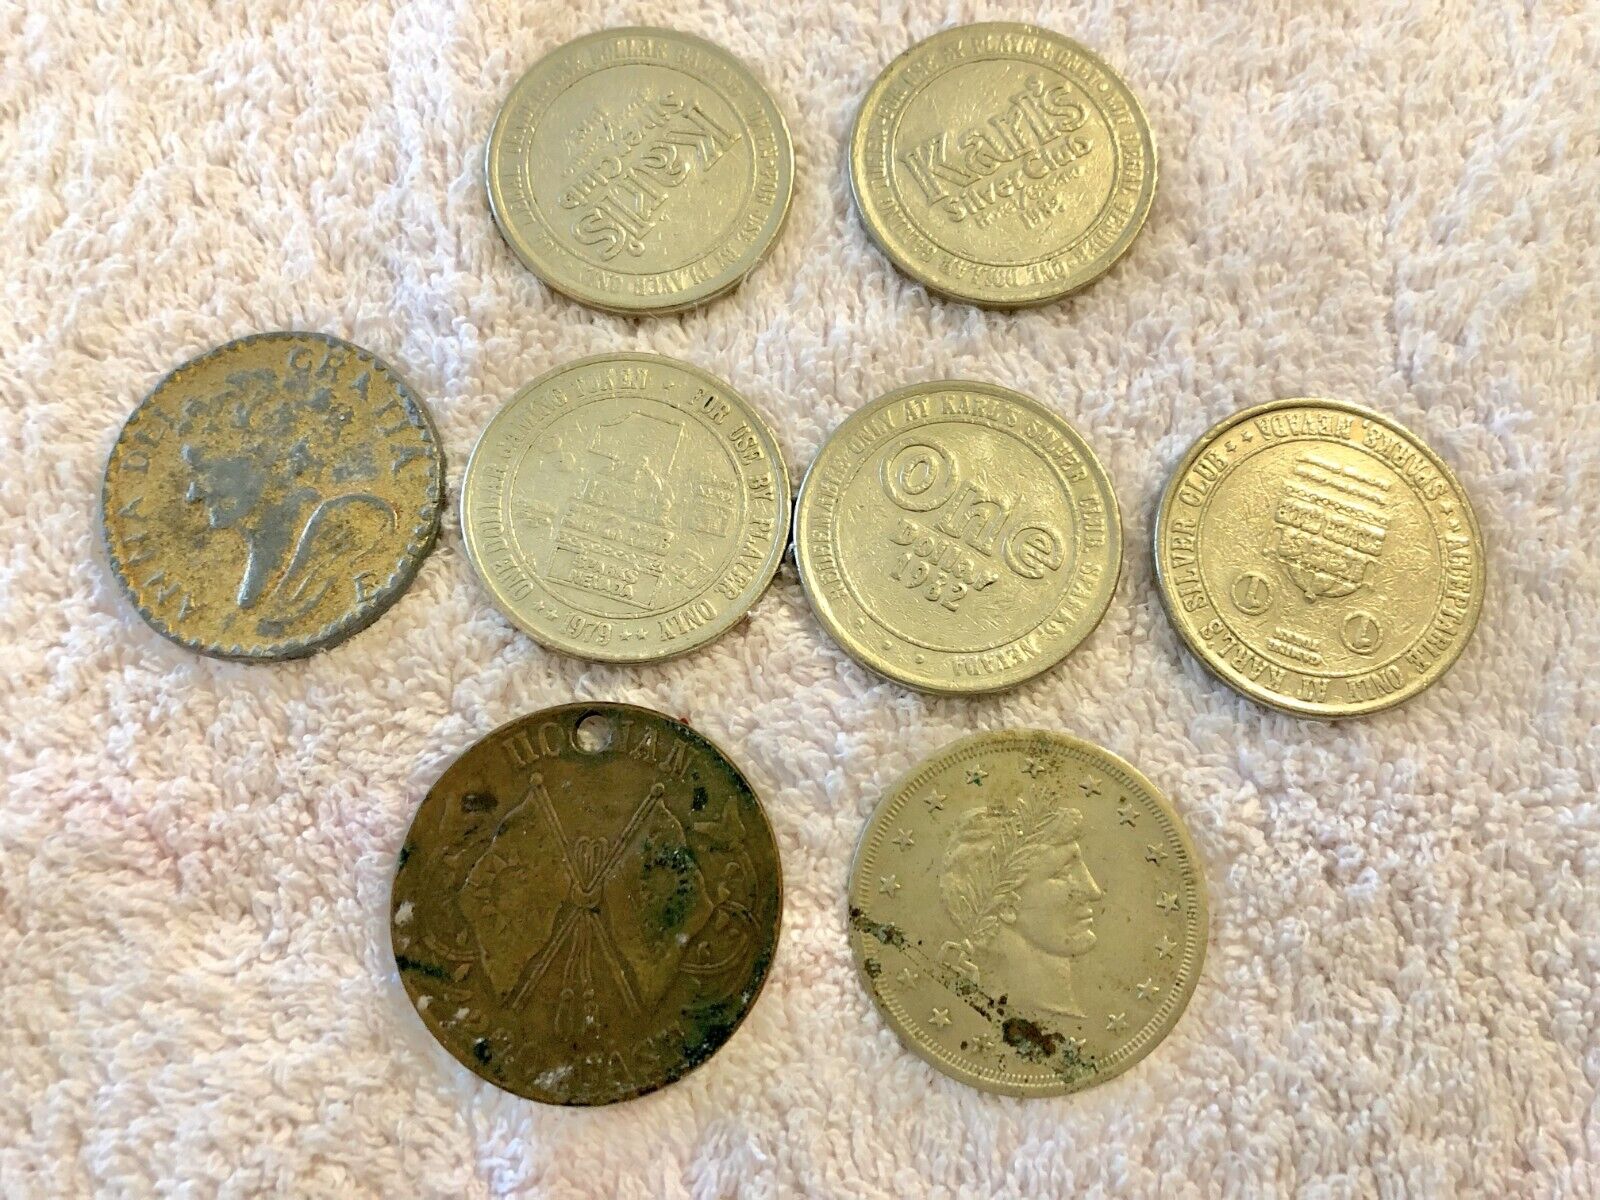 Vintage large (Silver dollar size) coins foreign and casino lot. silver??